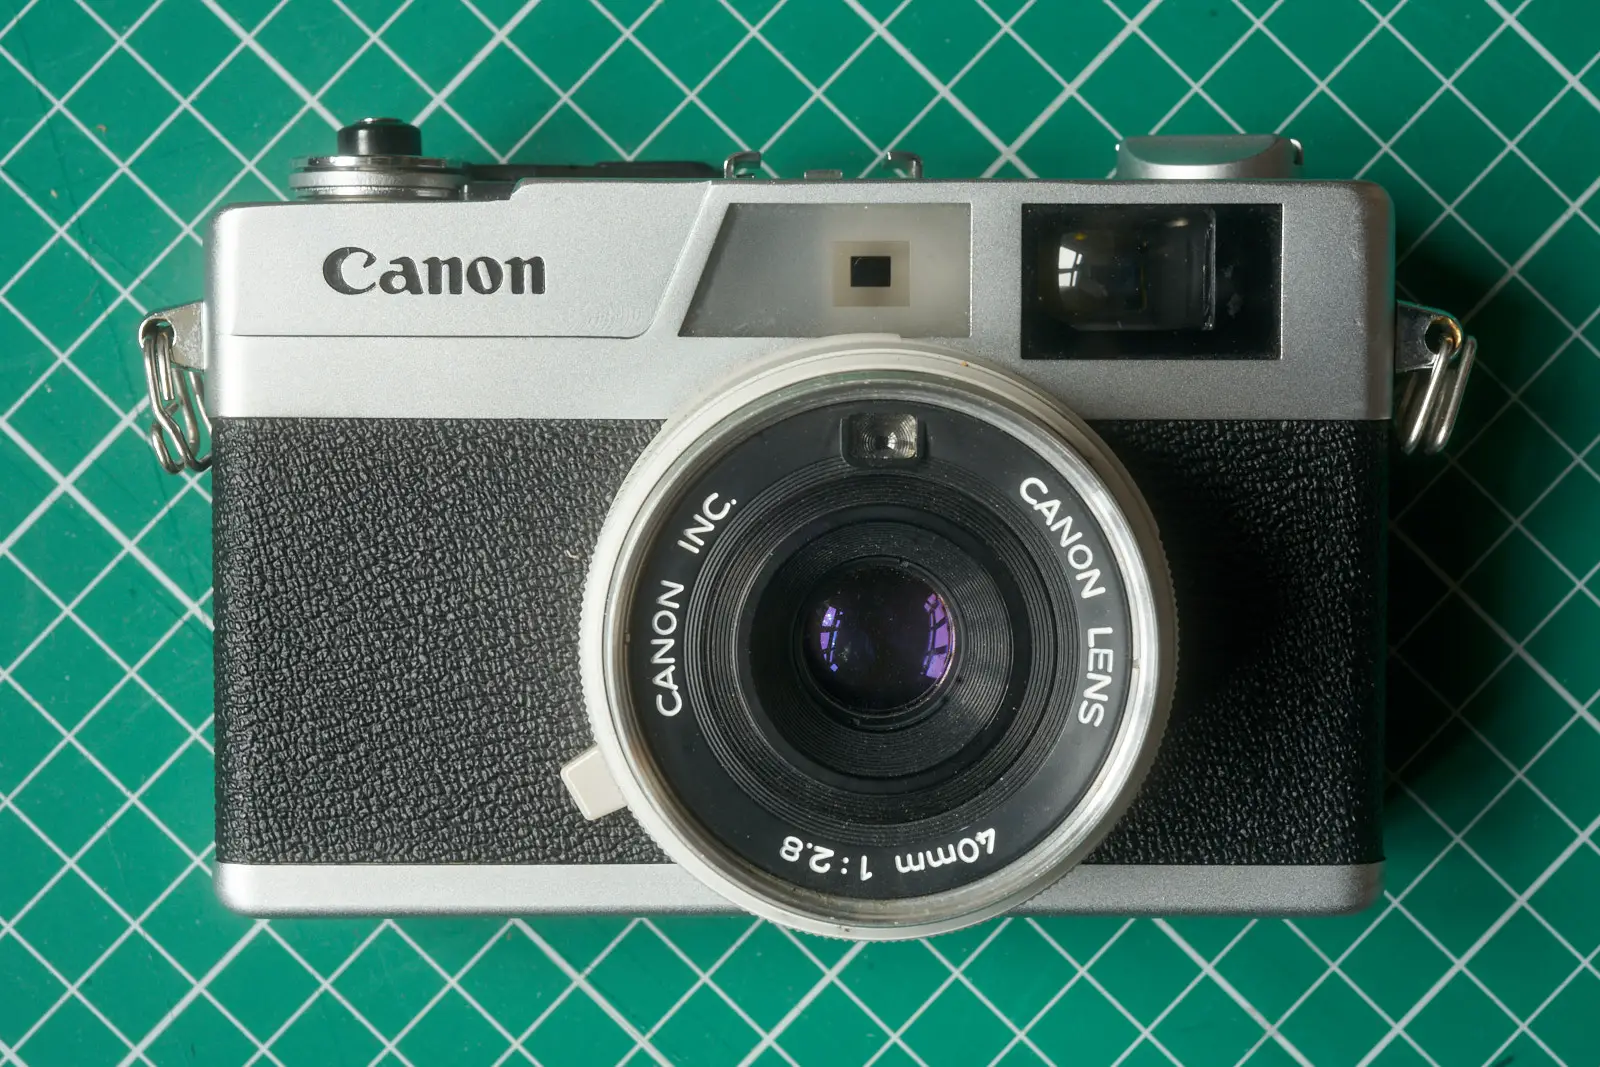 Canonet 28 Review - The modest Canon - By Bob Janes - 35mmc